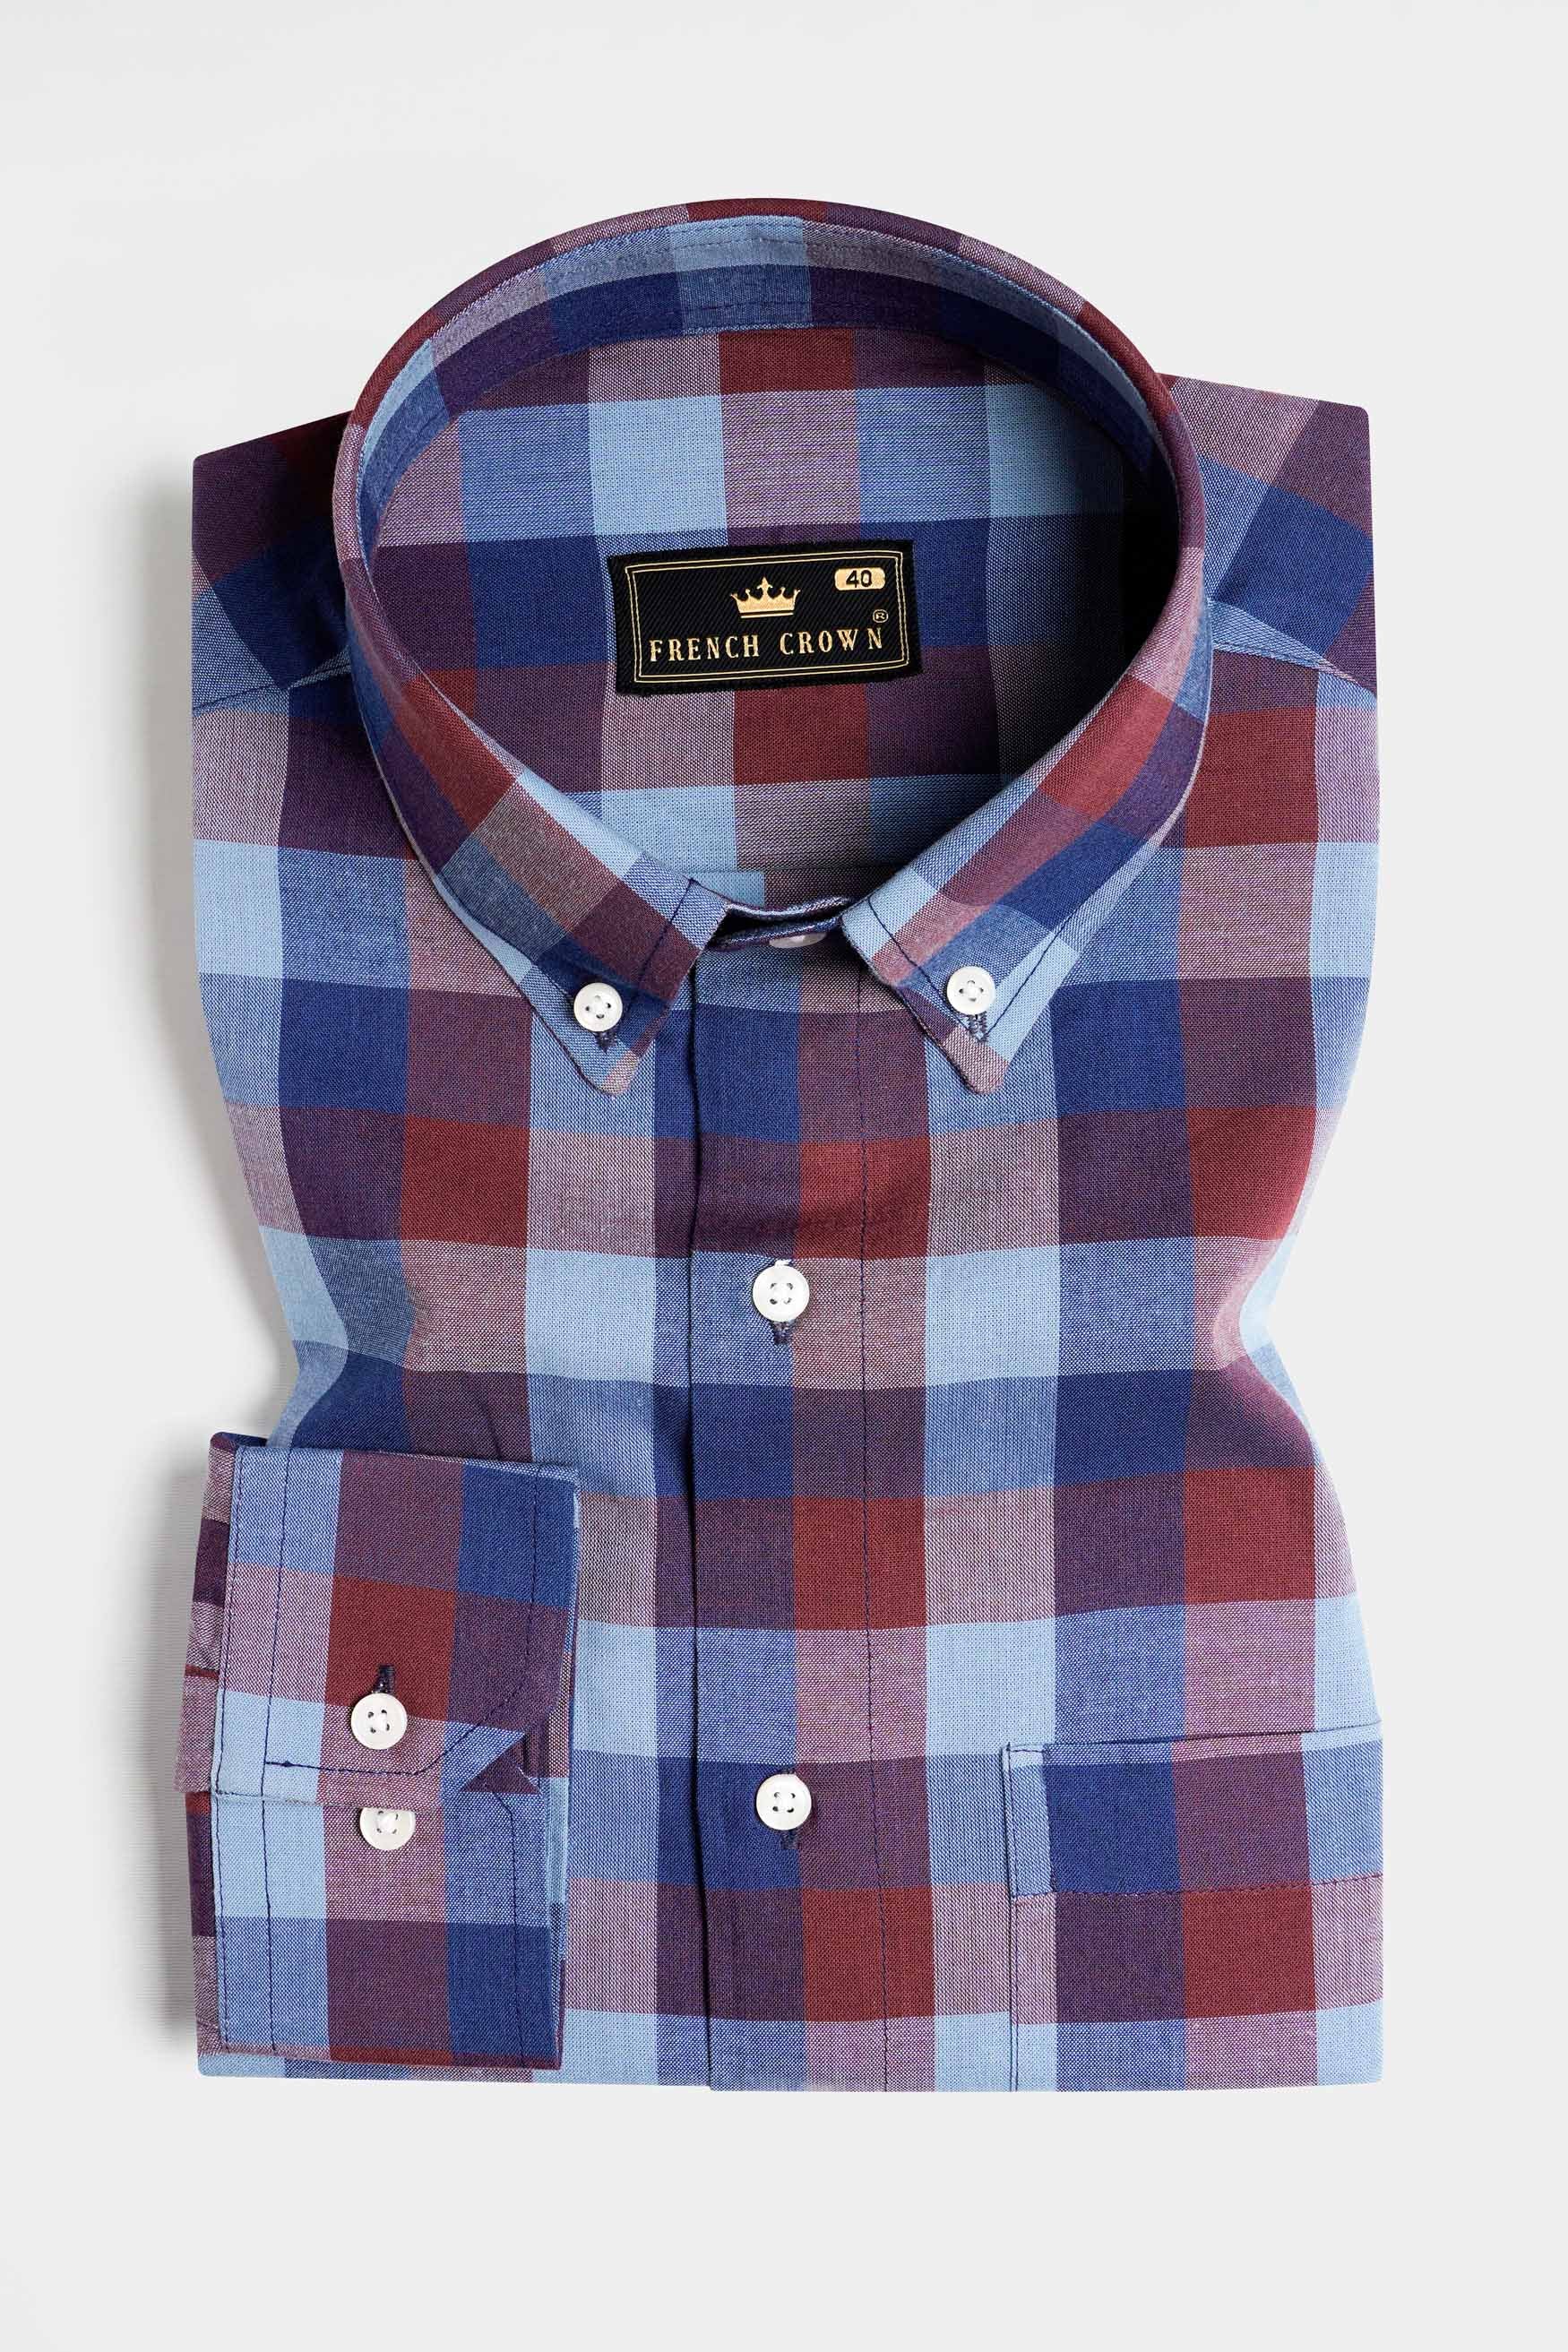 Lapis Blue with Cordovan Brown and Glacier Blue Checkered Royal Oxford Shirt